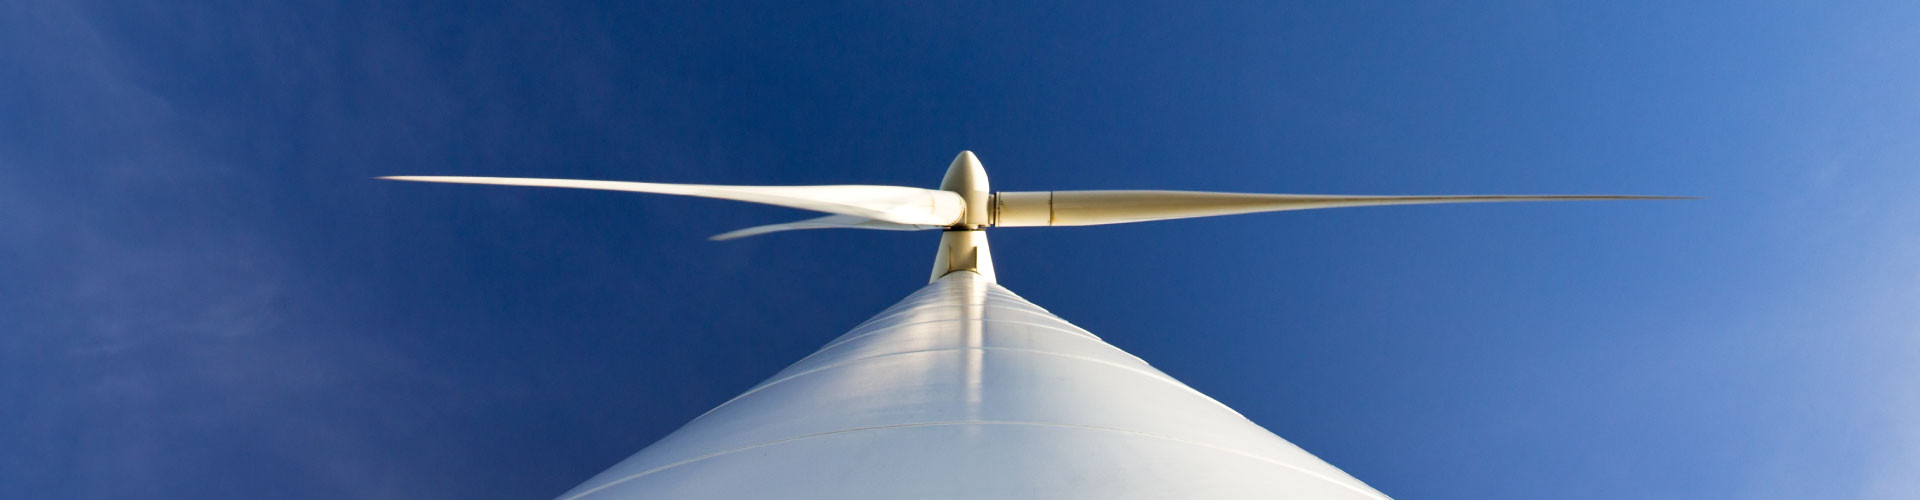 try-as-wind-energy-banner1